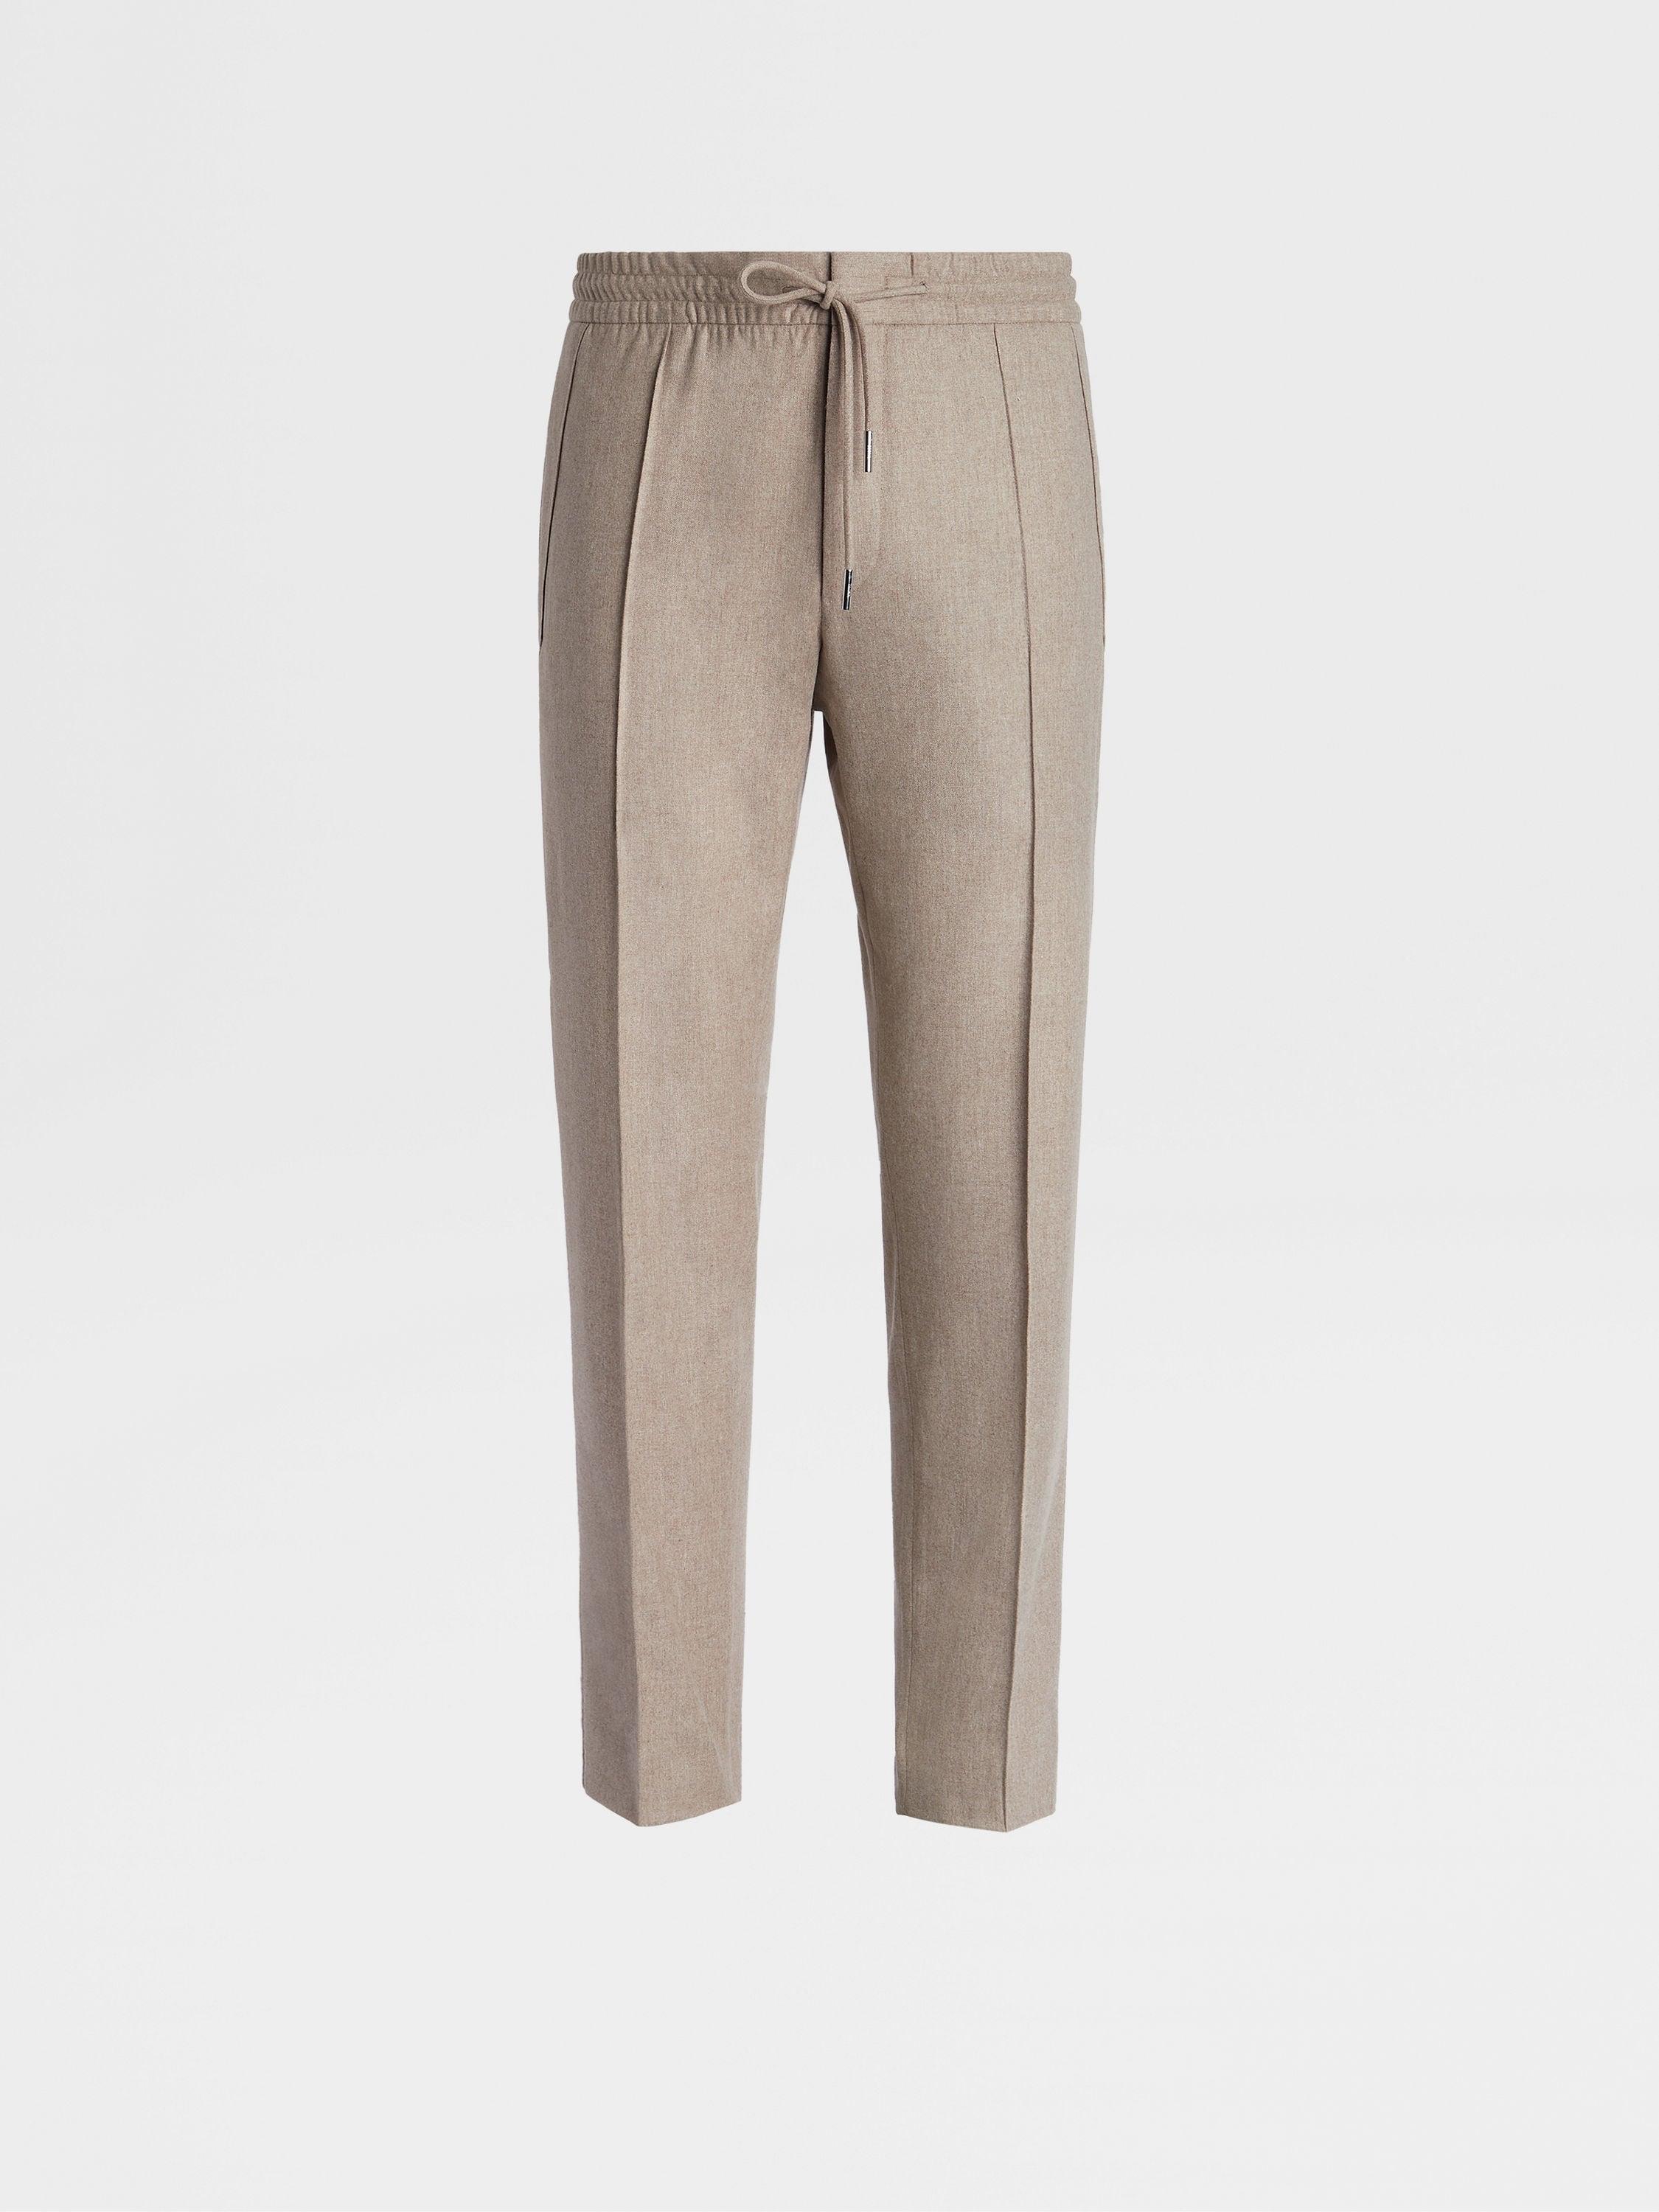 Light Taupe 14milmil14 Wool Blend | Zegna LU FW23 Joggers 28046499